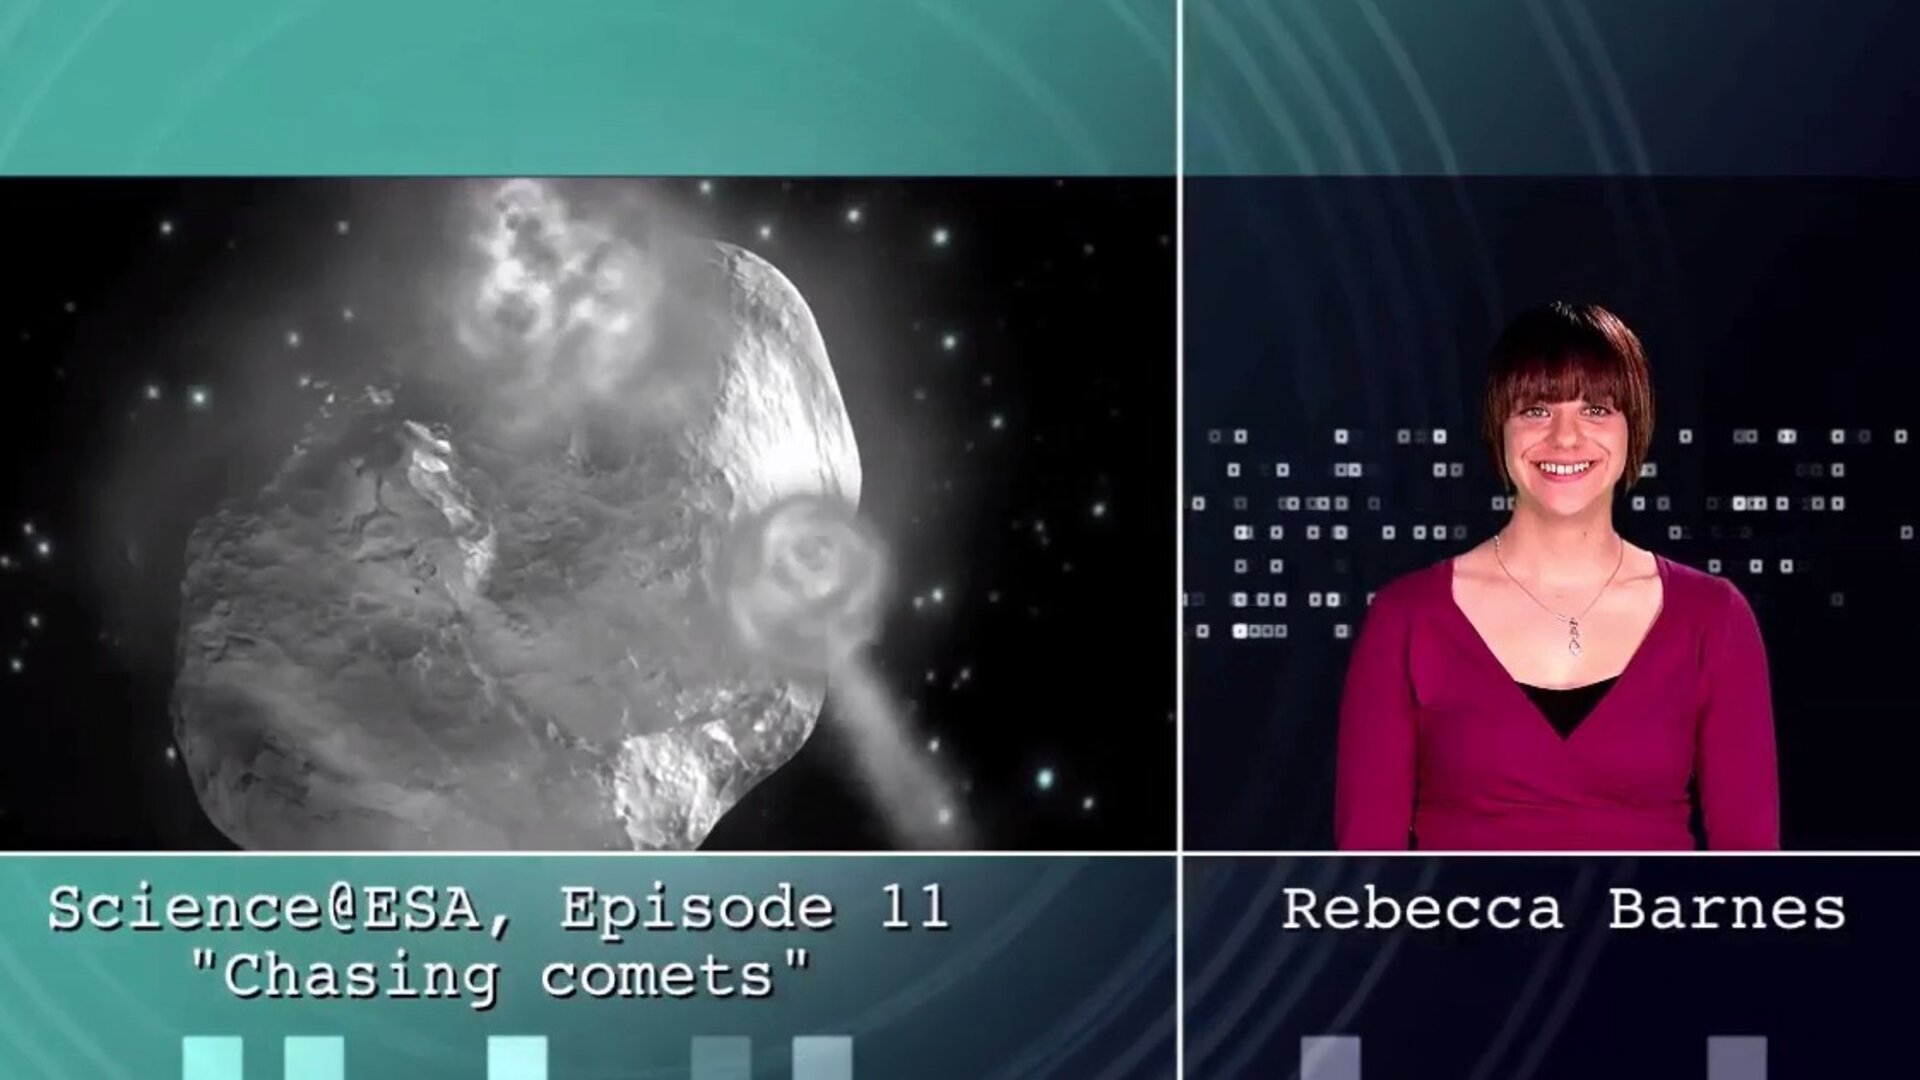 Science@esa: Episode 11: Chasing comets